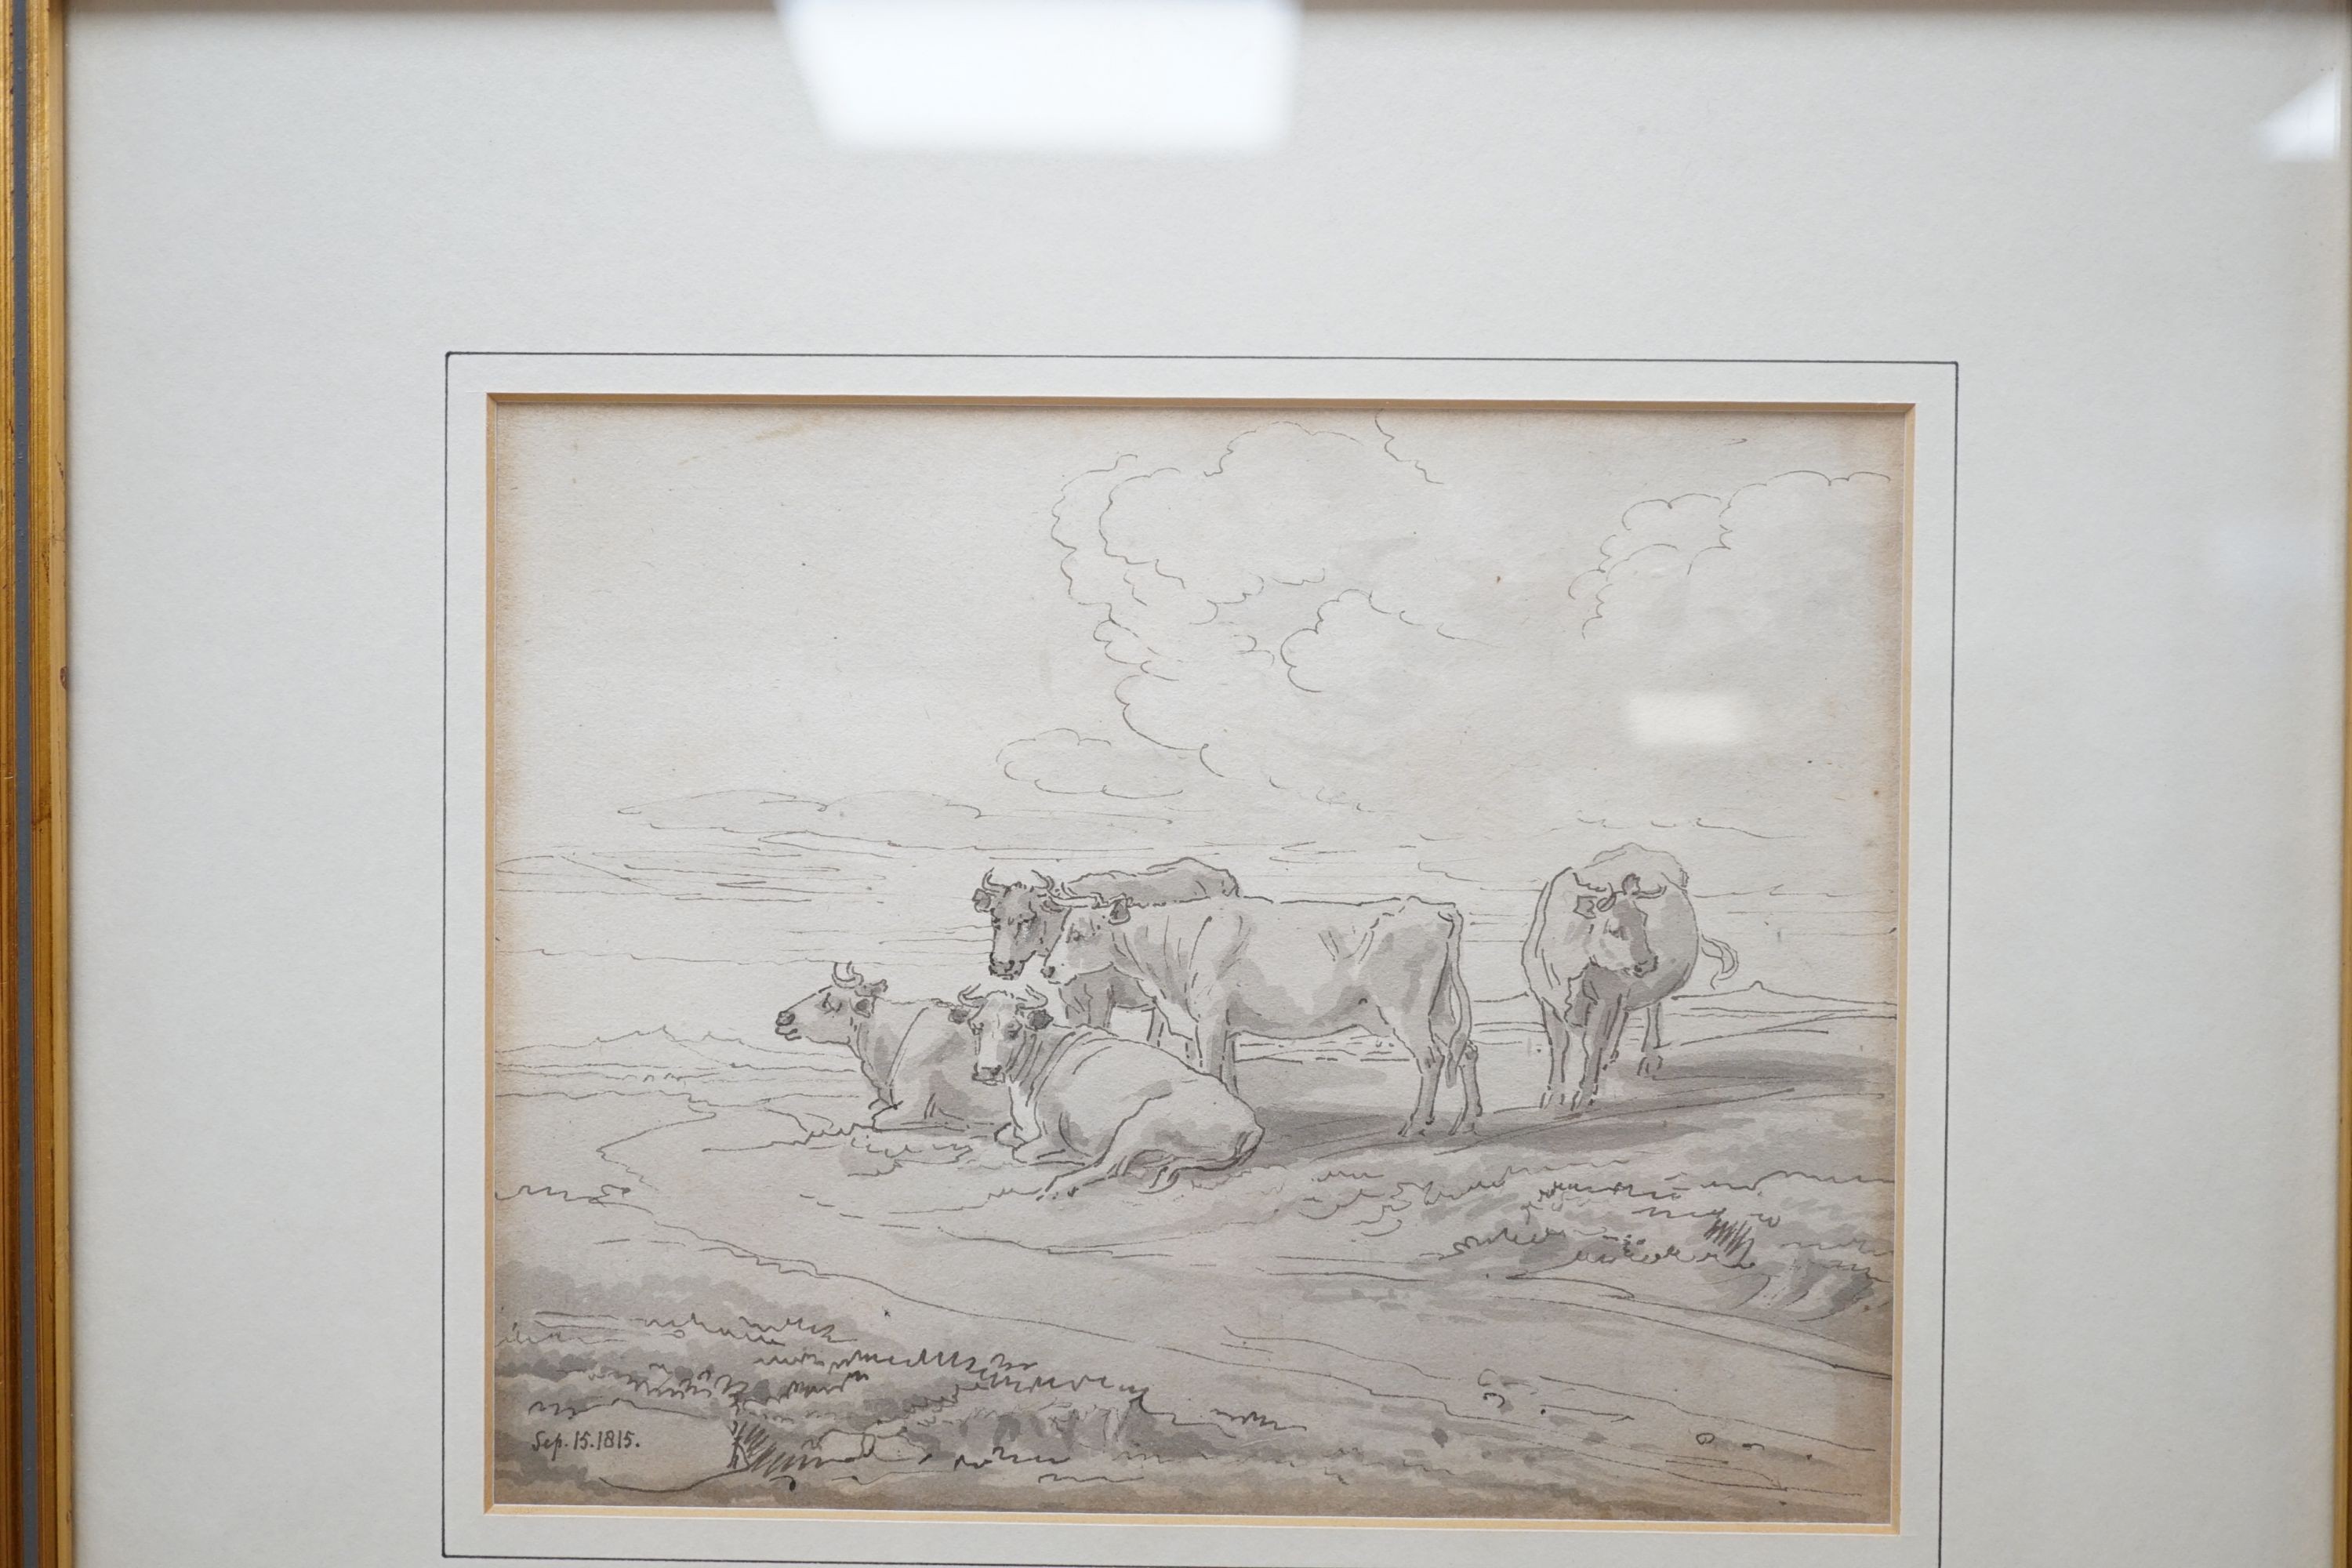 John White Abbott (1763-1851), Cattle resting, pen and wash drawing, inscribed Sep.15.1815, 15 x 19cm                                                                                                                       